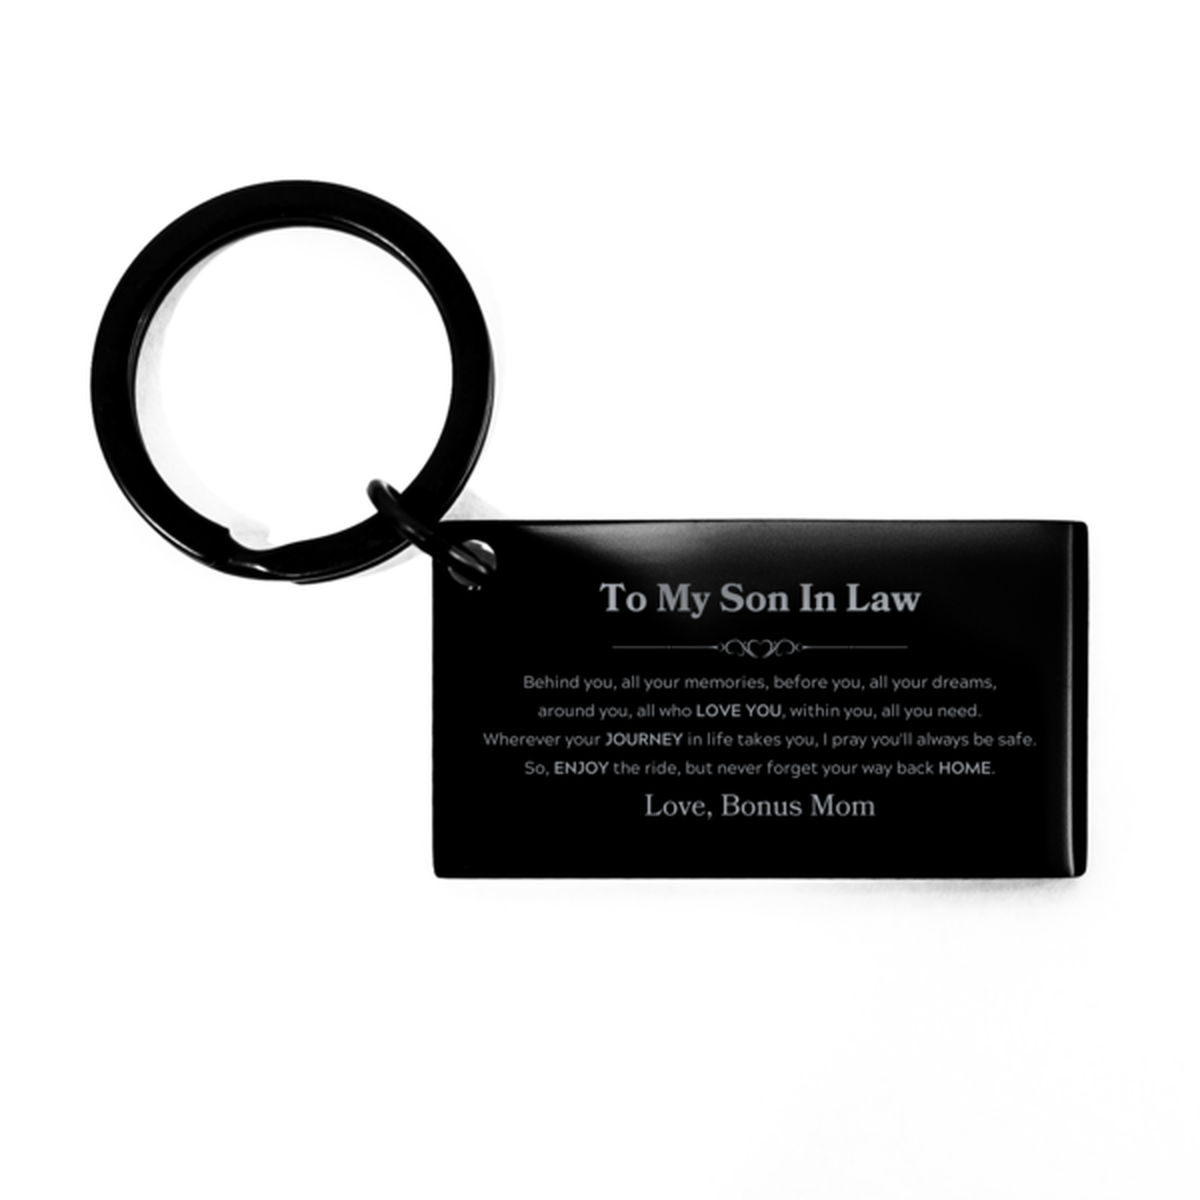 To My Son In Law Graduation Gifts from Bonus Mom, Son In Law Keychain Christmas Birthday Gifts for Son In Law Behind you, all your memories, before you, all your dreams. Love, Bonus Mom